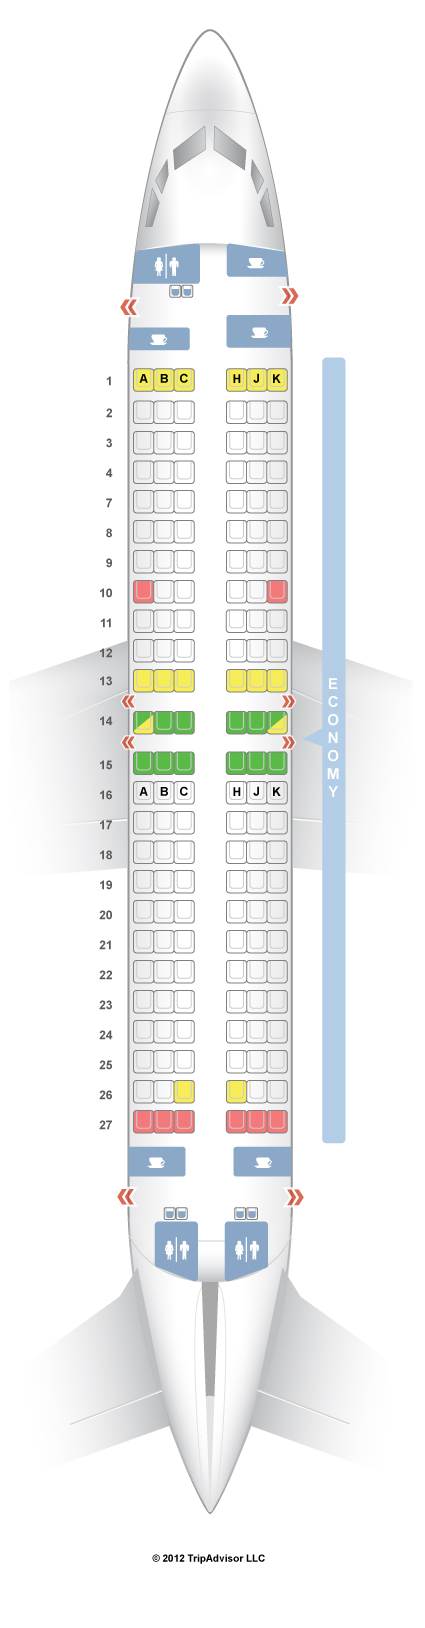 Flair Airlines Boeing 737 Seat Map Updated Find The Best Seat SeatMaps ...